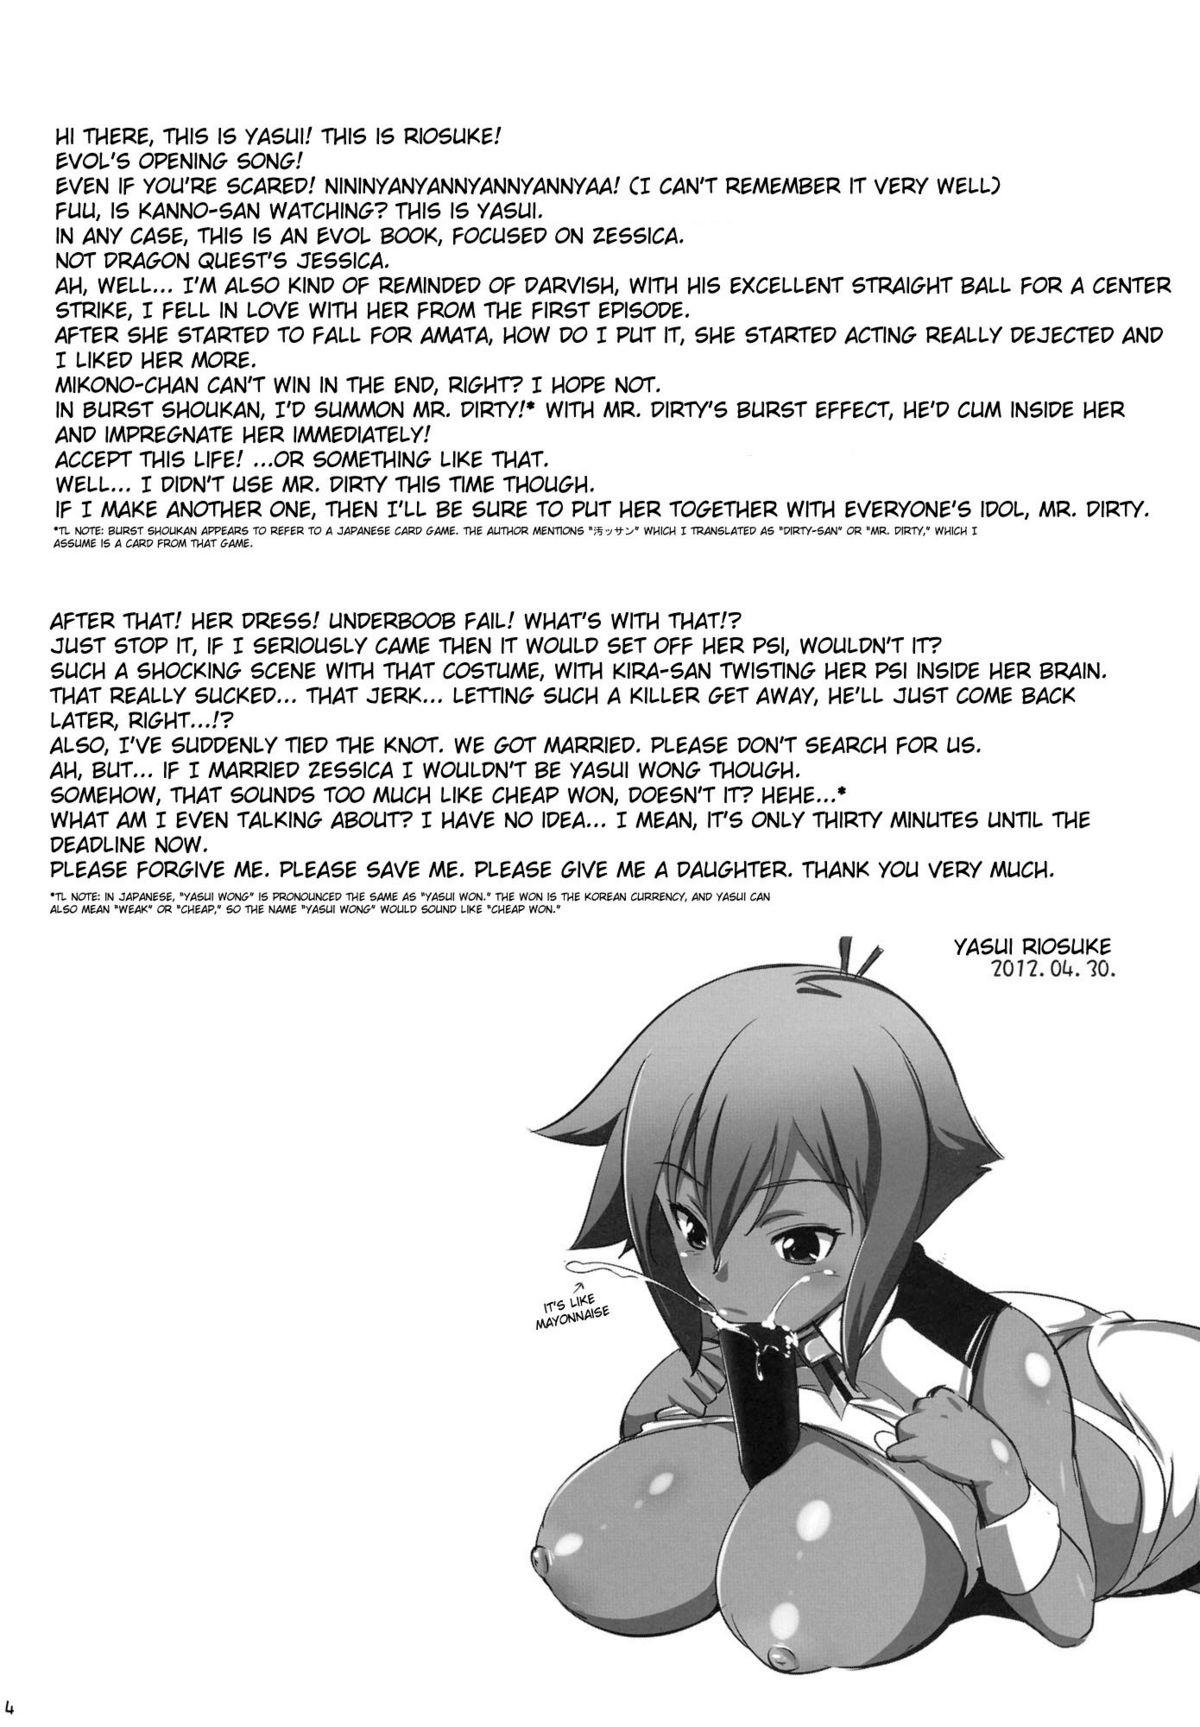 Real Amateurs Combine Dependence - Aquarion evol Shemales - Page 3